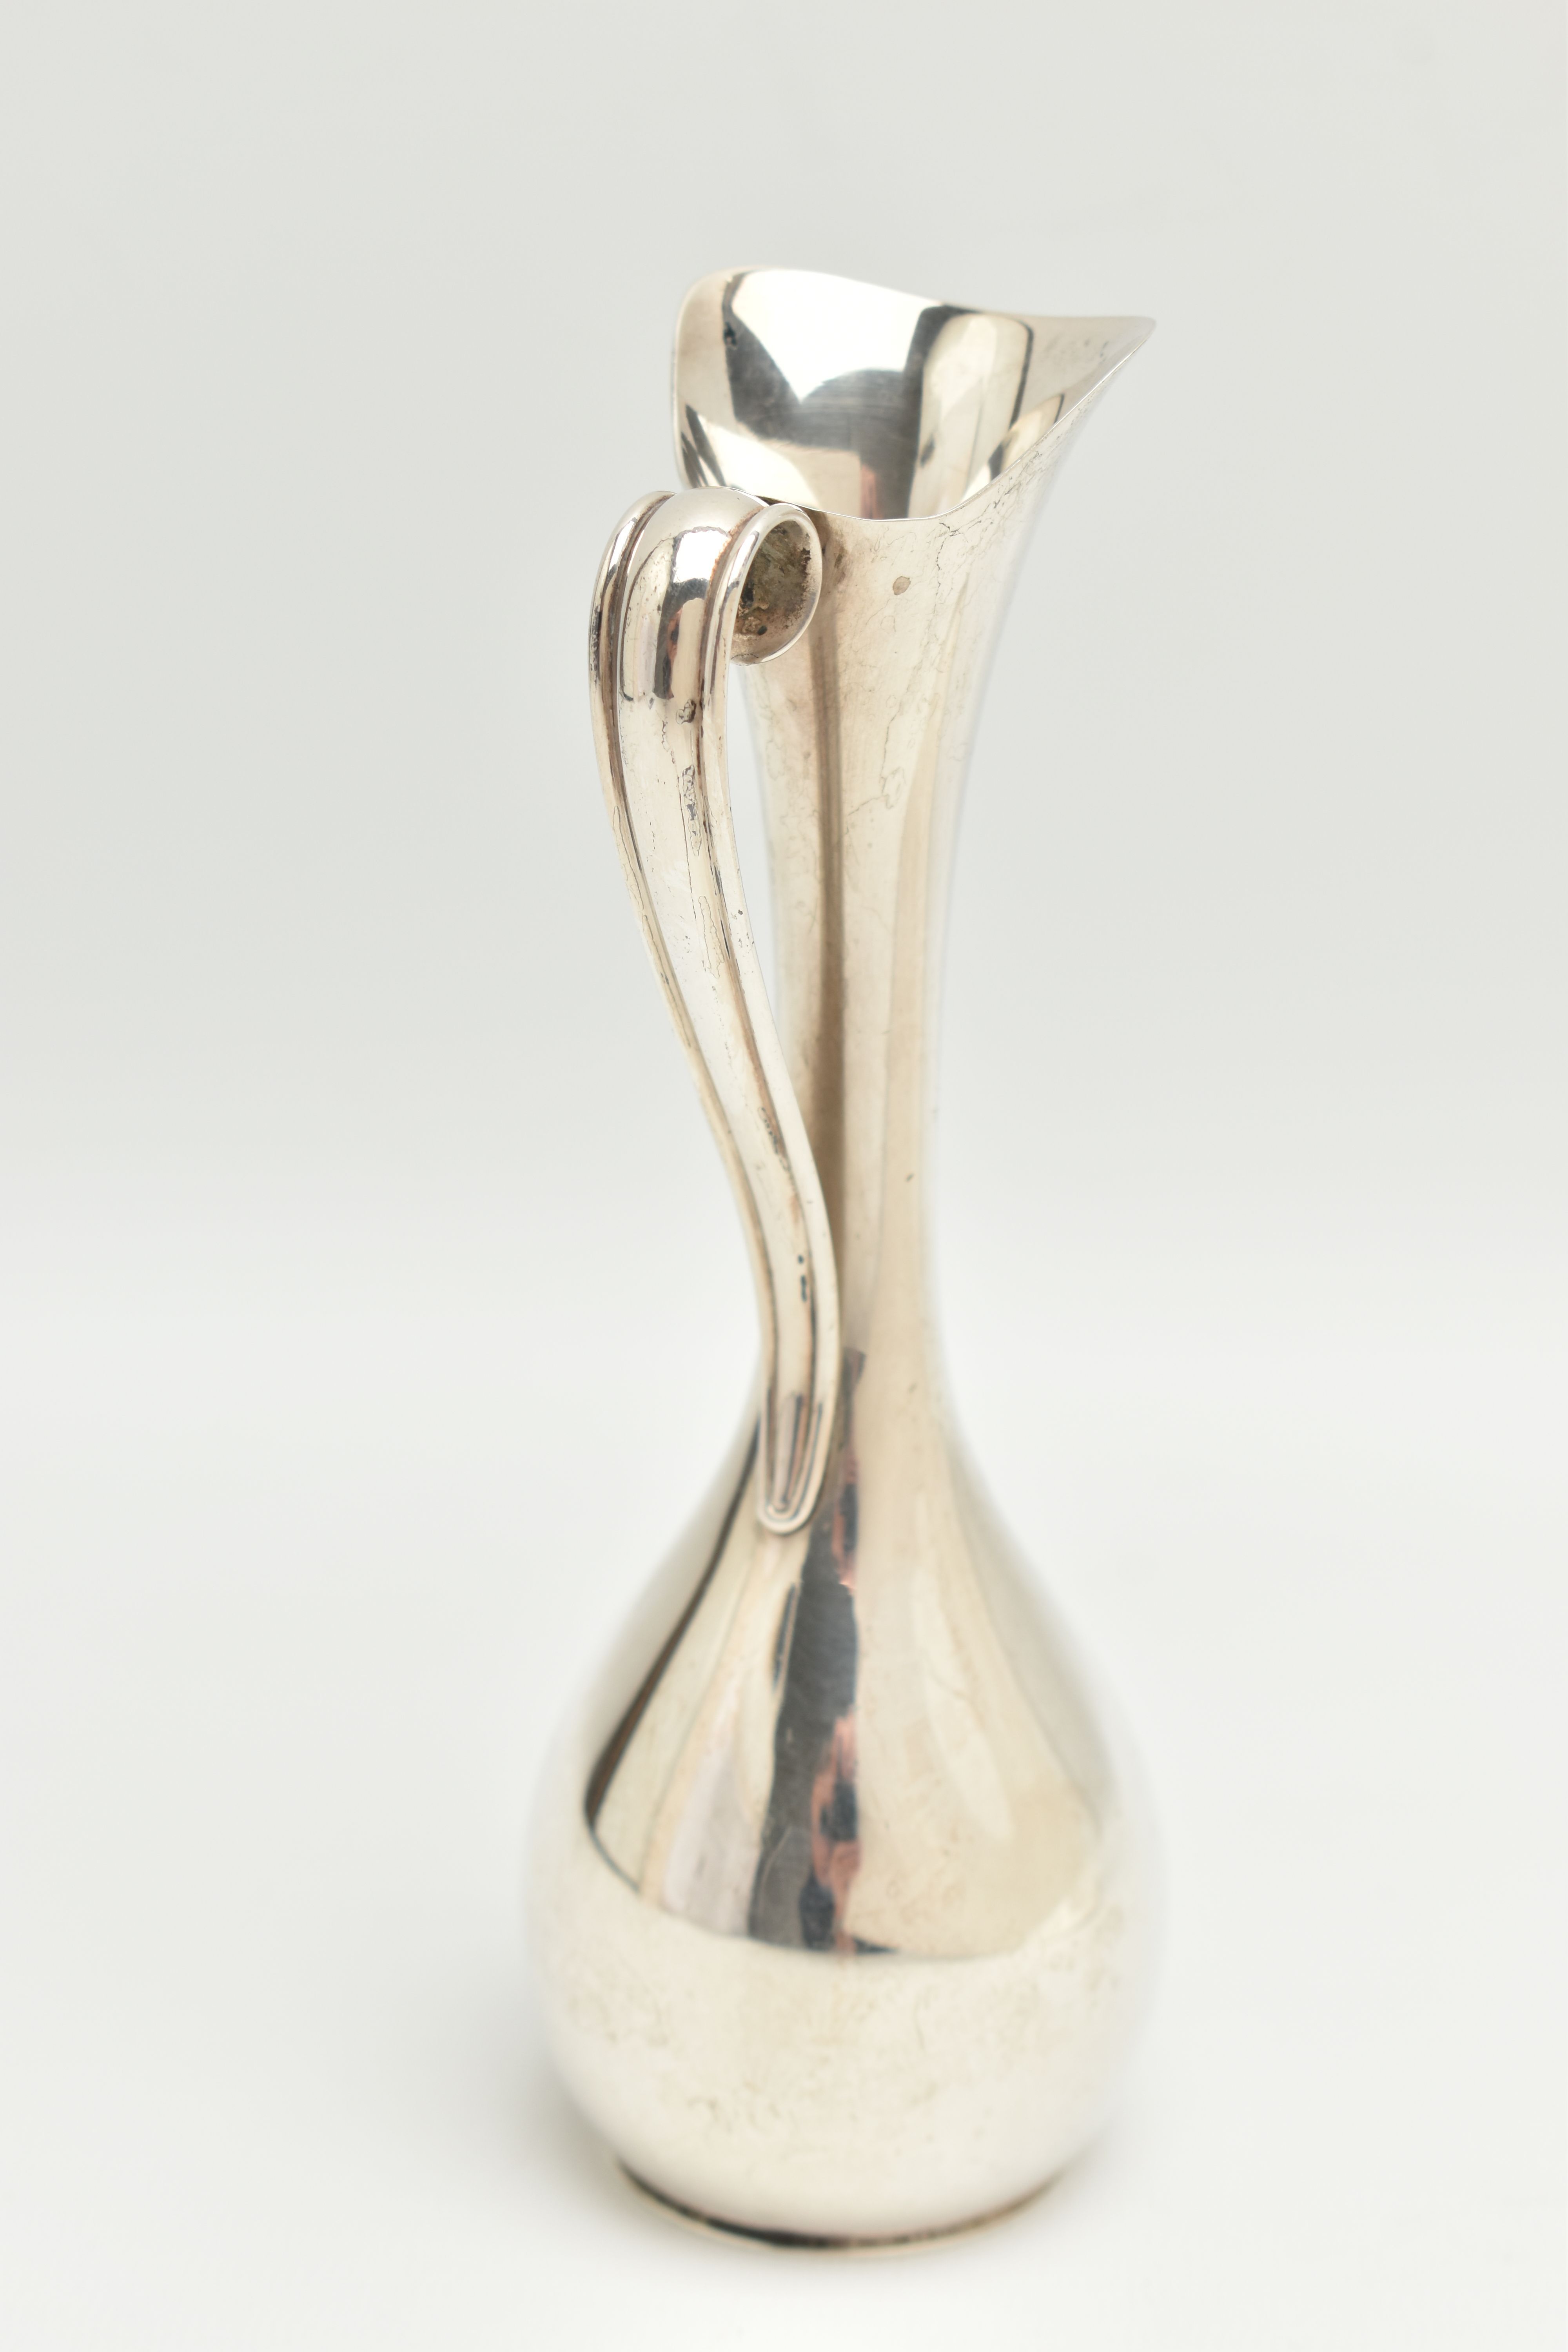 A LATE 20TH CENTURY DANISH SILVER PLATED BUD VASE IN THE FORM OF A JUG, sinuous strap handle, - Image 3 of 6